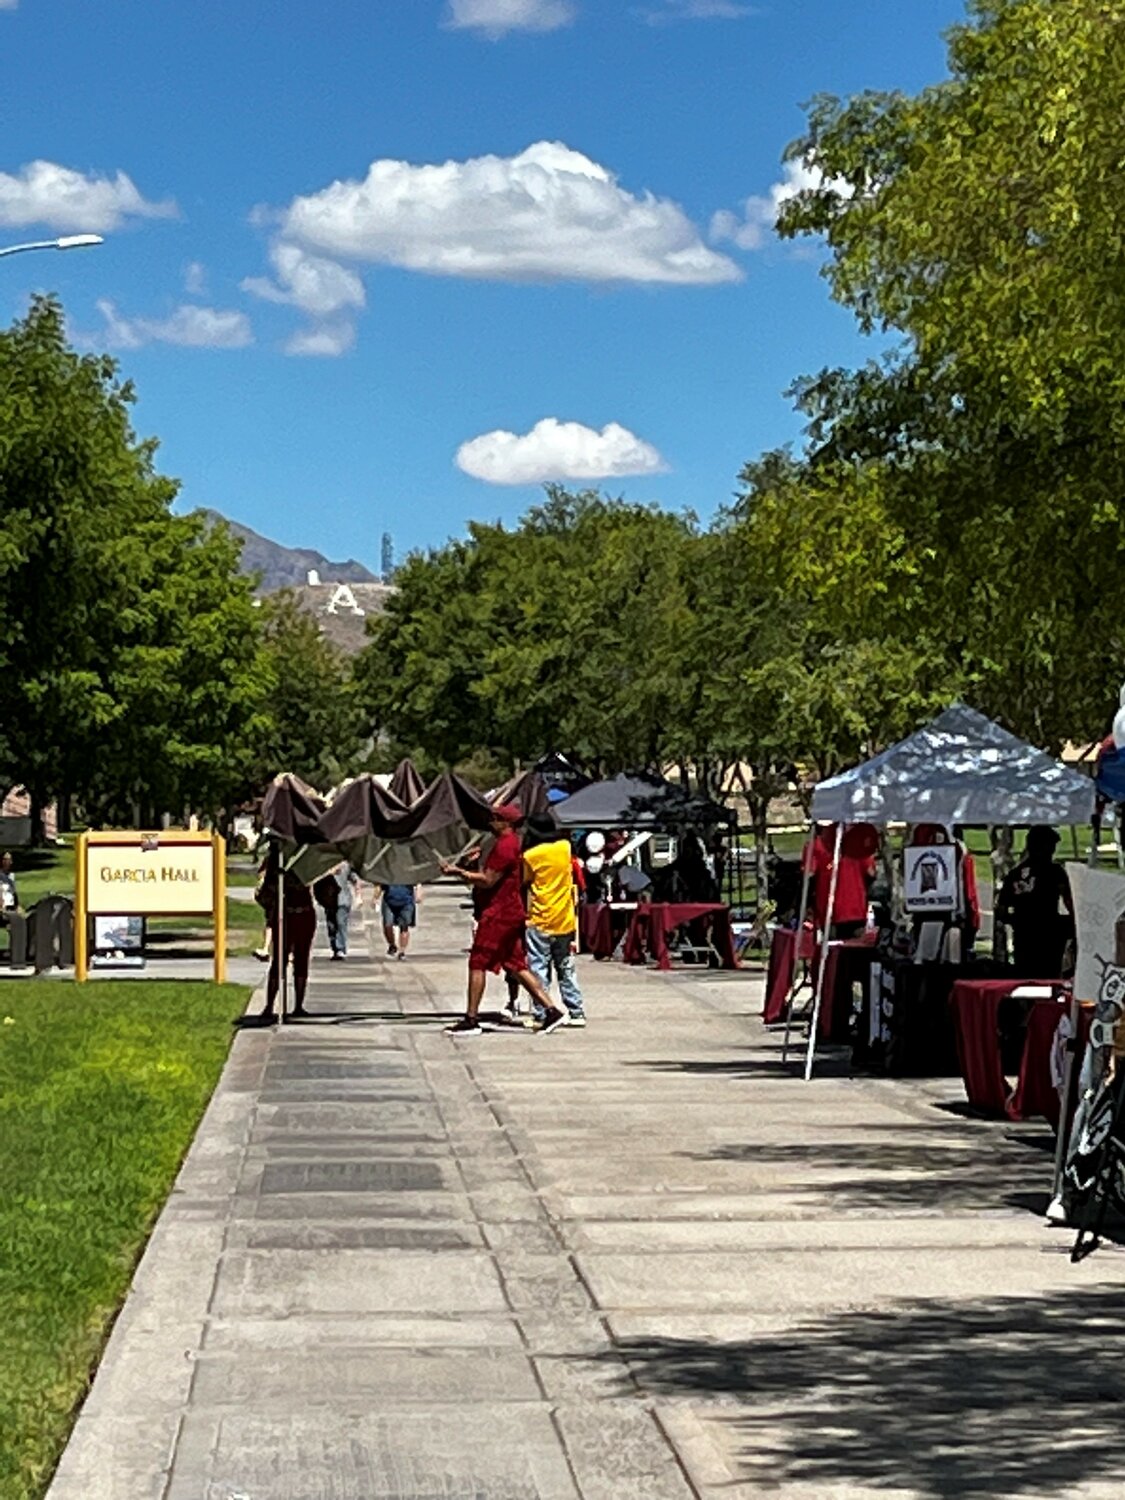 Vendors and organizations lined the International Mall at New Mexico State University Aug. 12 to welcome new Aggie freshmen as they moved into the dormitories.